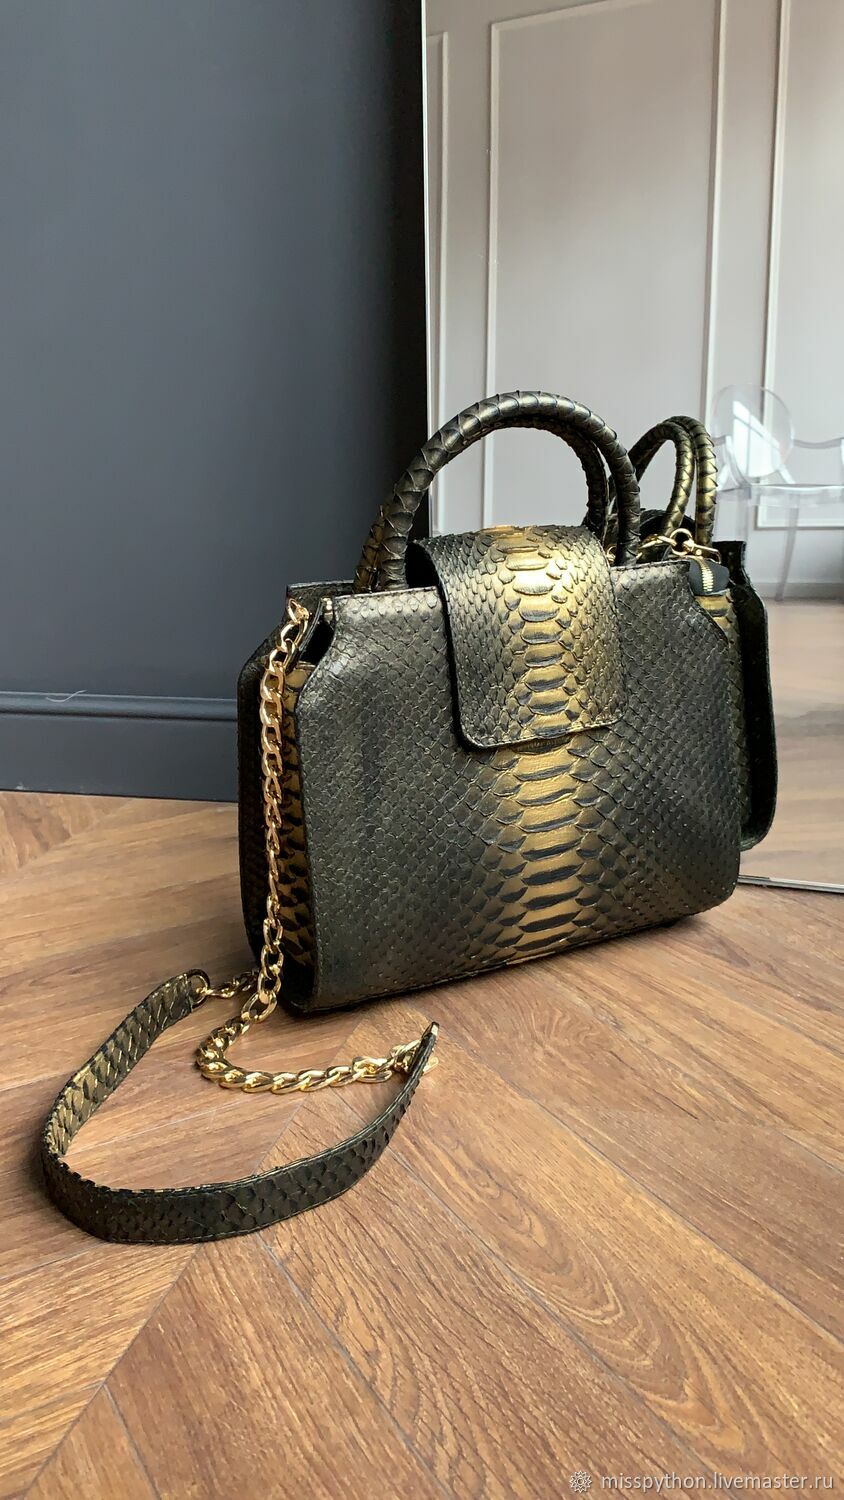 The bag is a leather bag made of python skin from a snake, Classic Bag, Izhevsk,  Фото №1